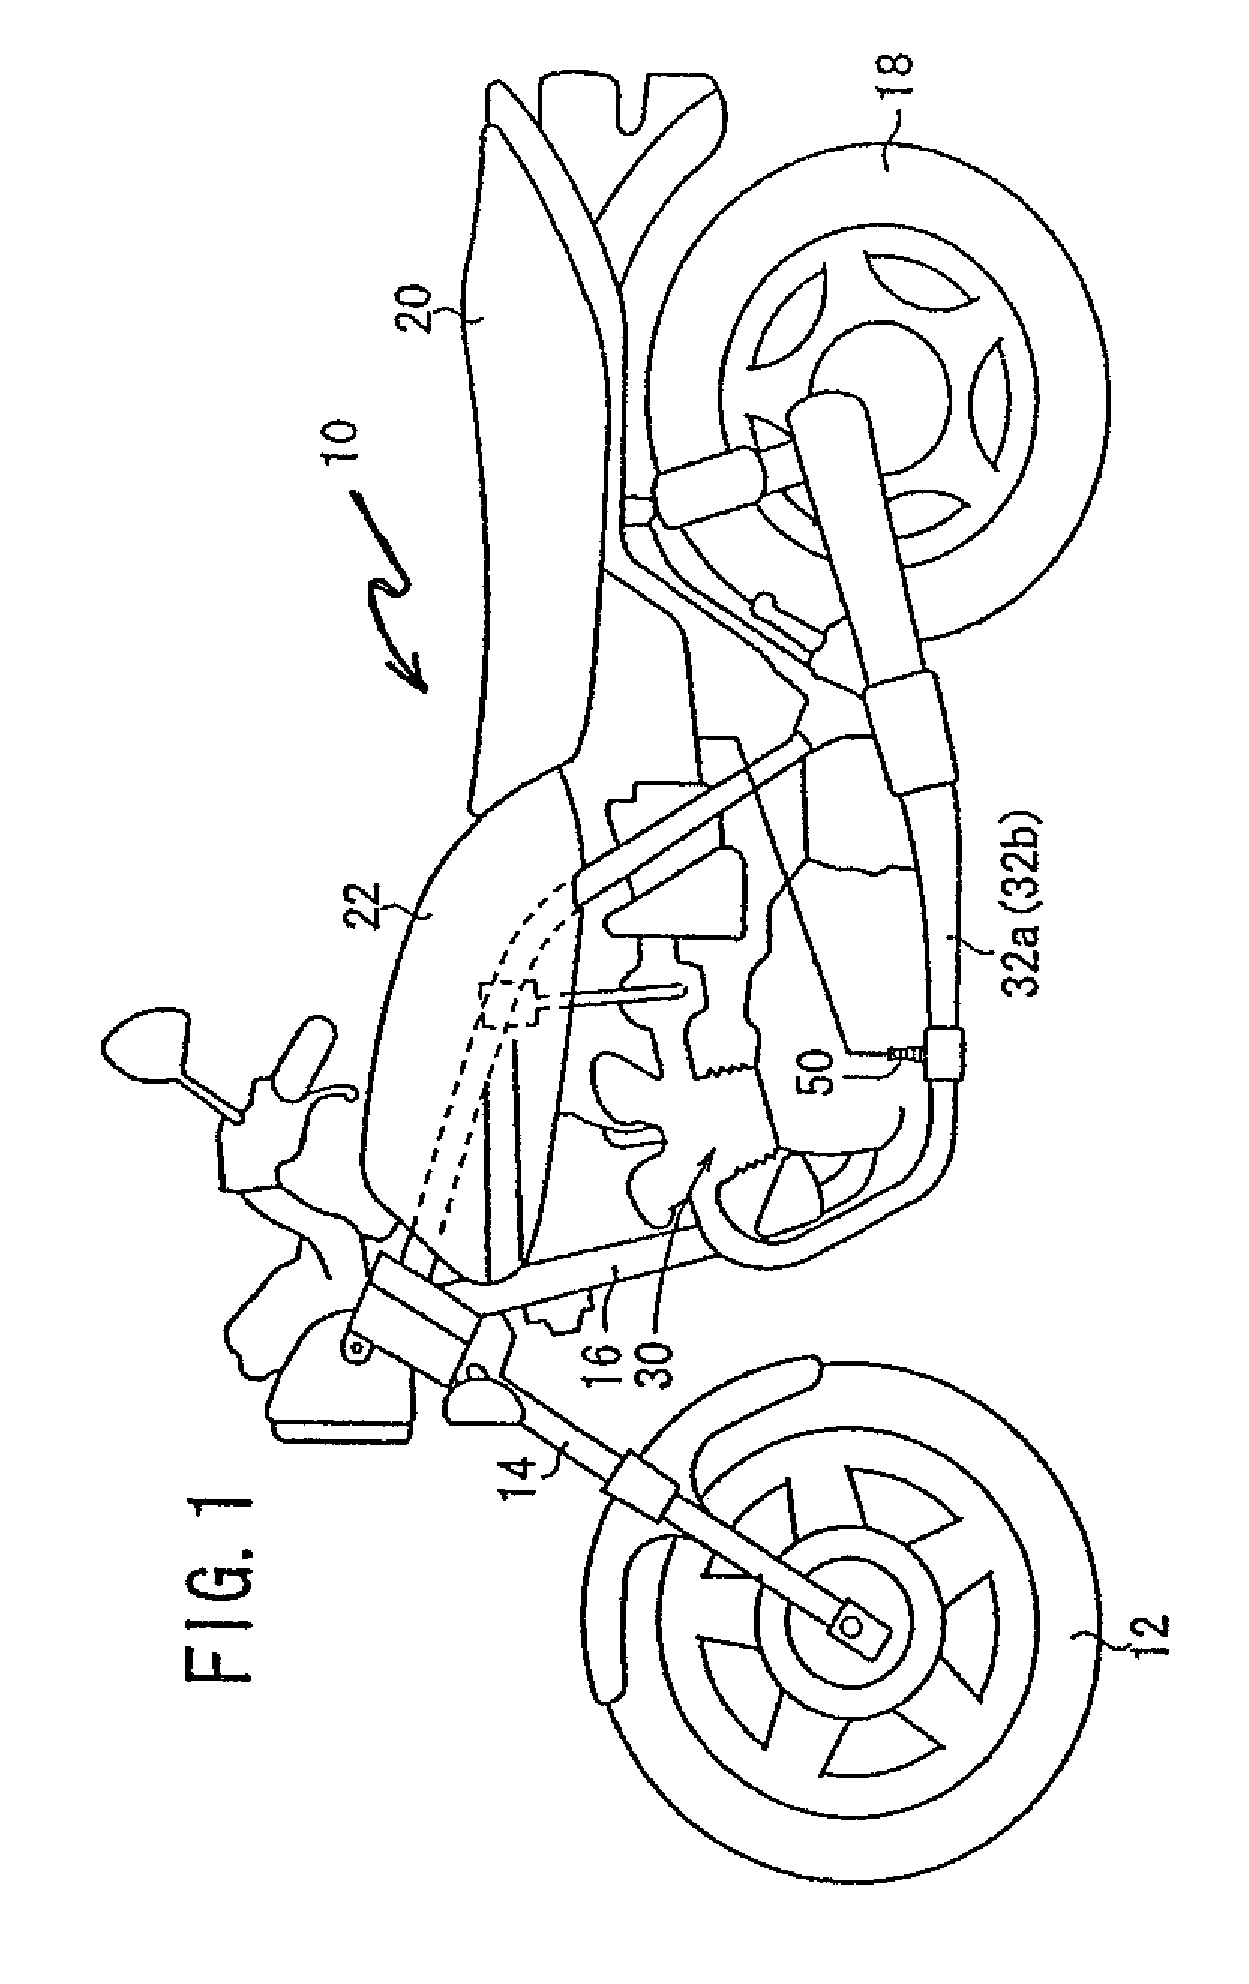 Mounting structure for an air-fuel ratio sensor in a motorcycle, and exhaust subassembly including same